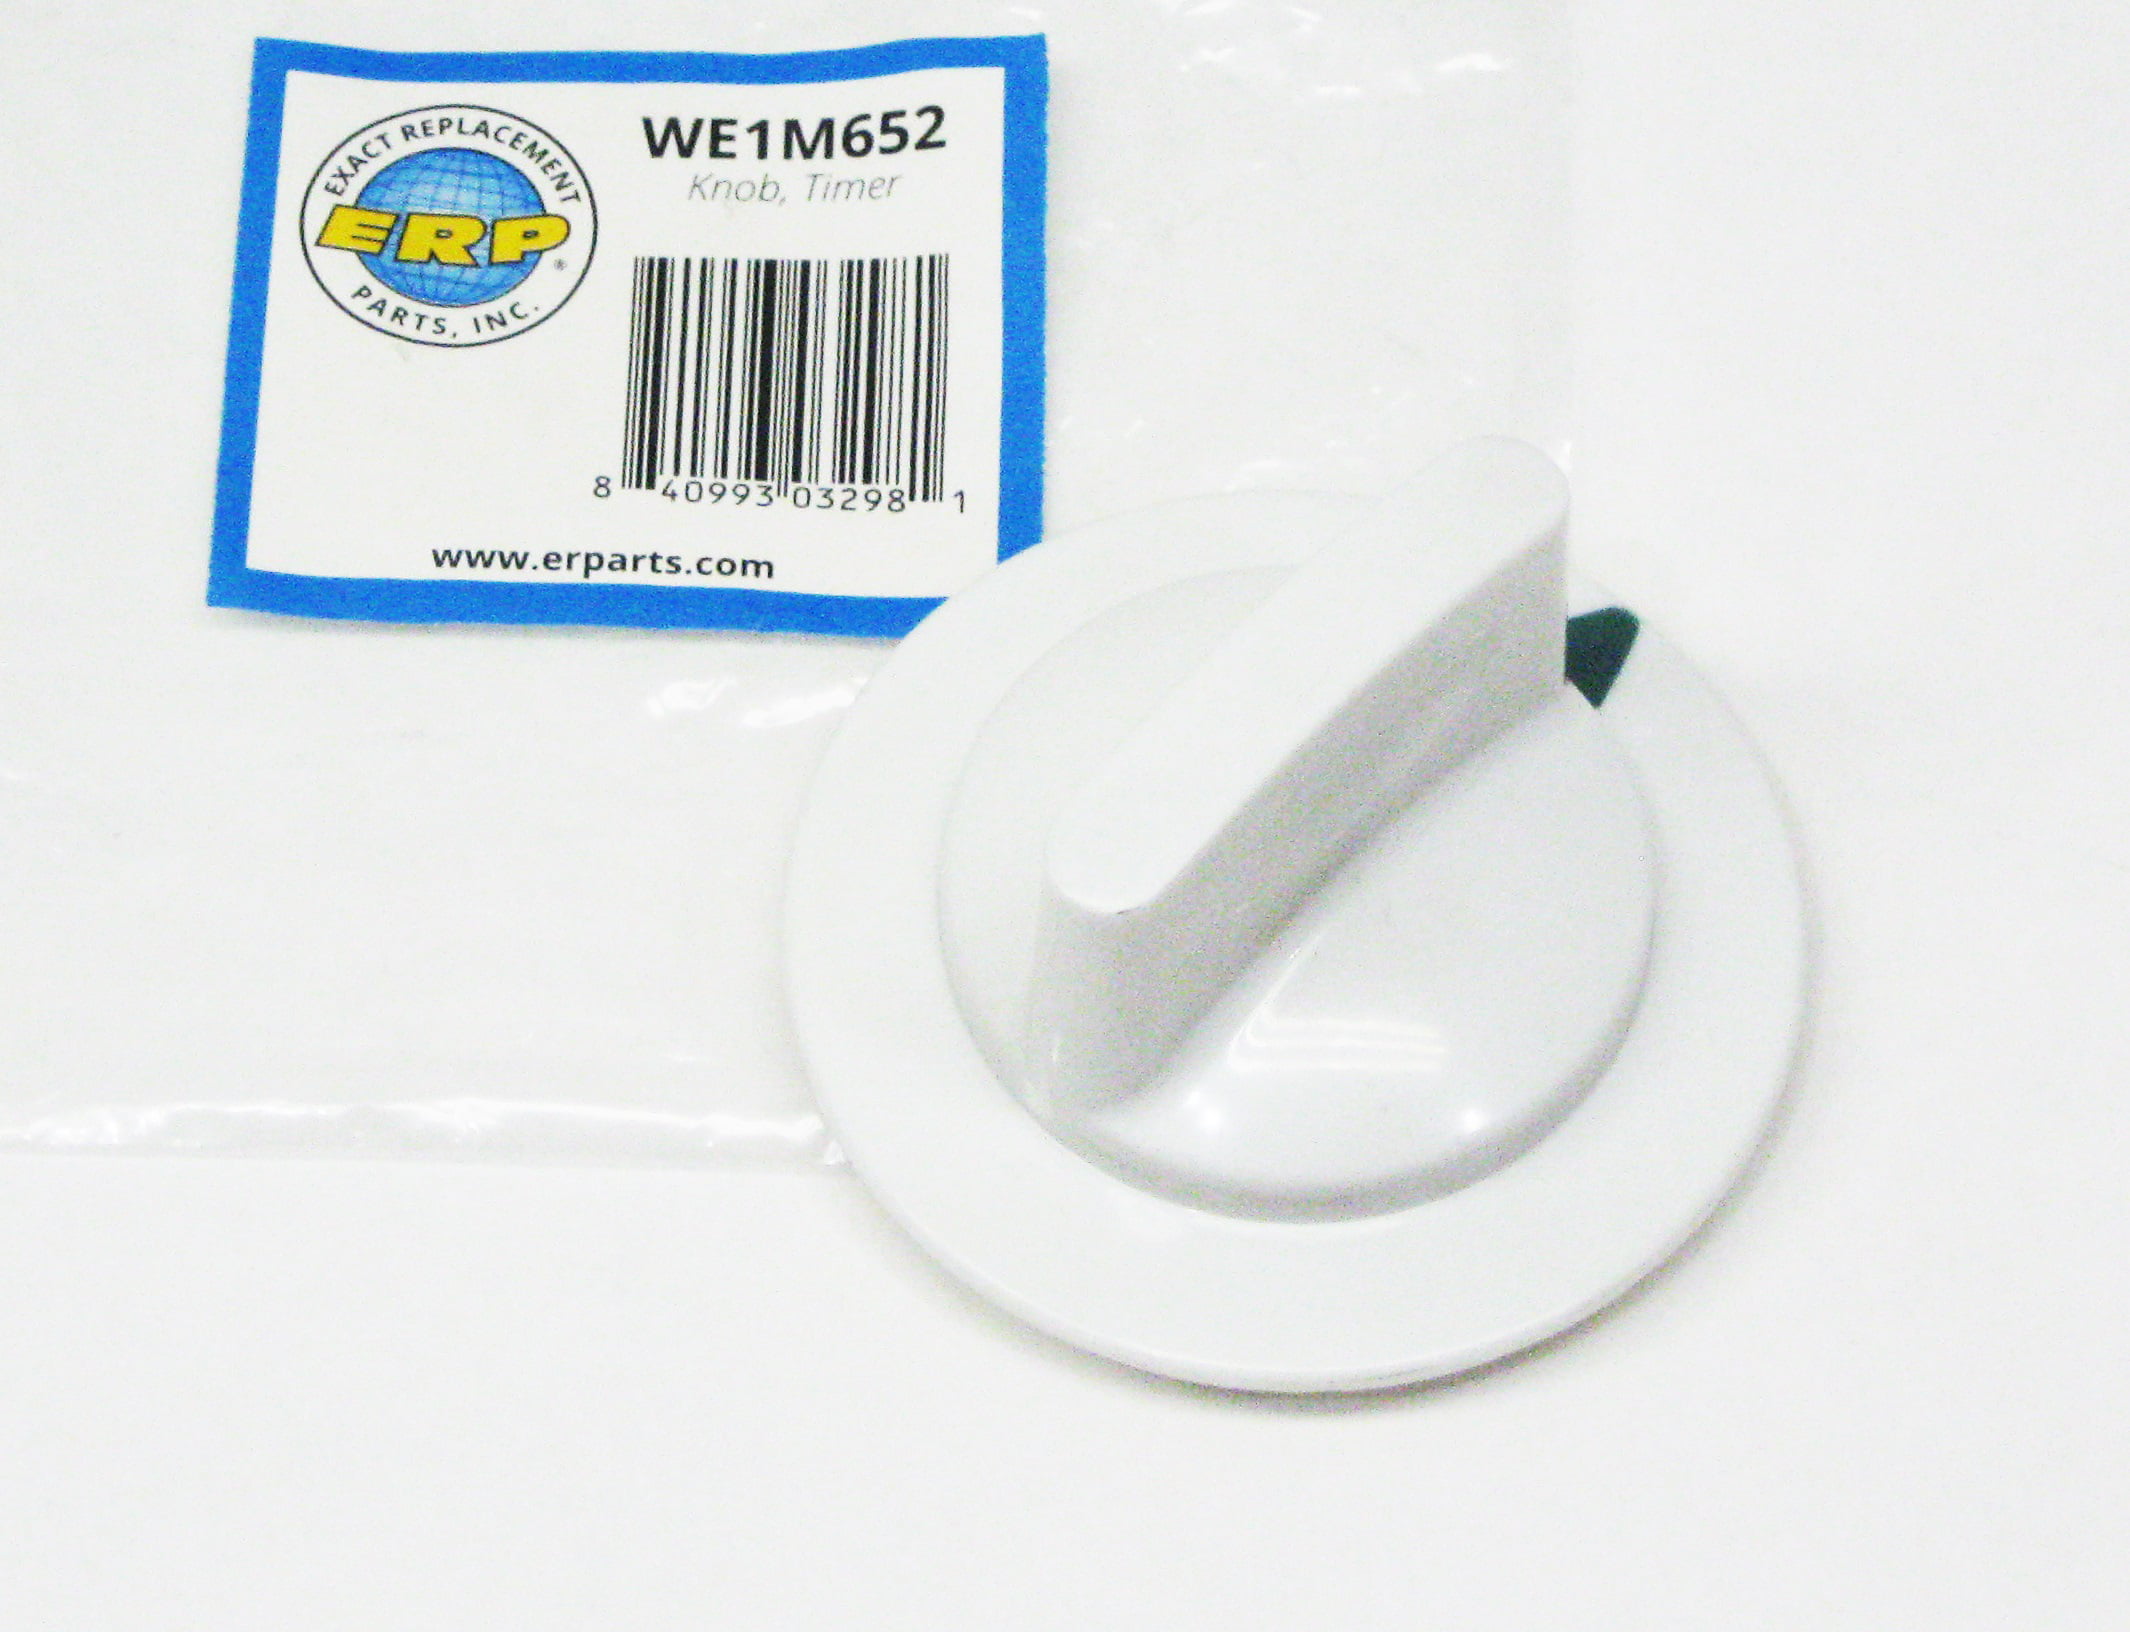 Details about   WH1X2721 for GE Dryer & Washer Washing Machine Control Knob PS271094 AP2044893 